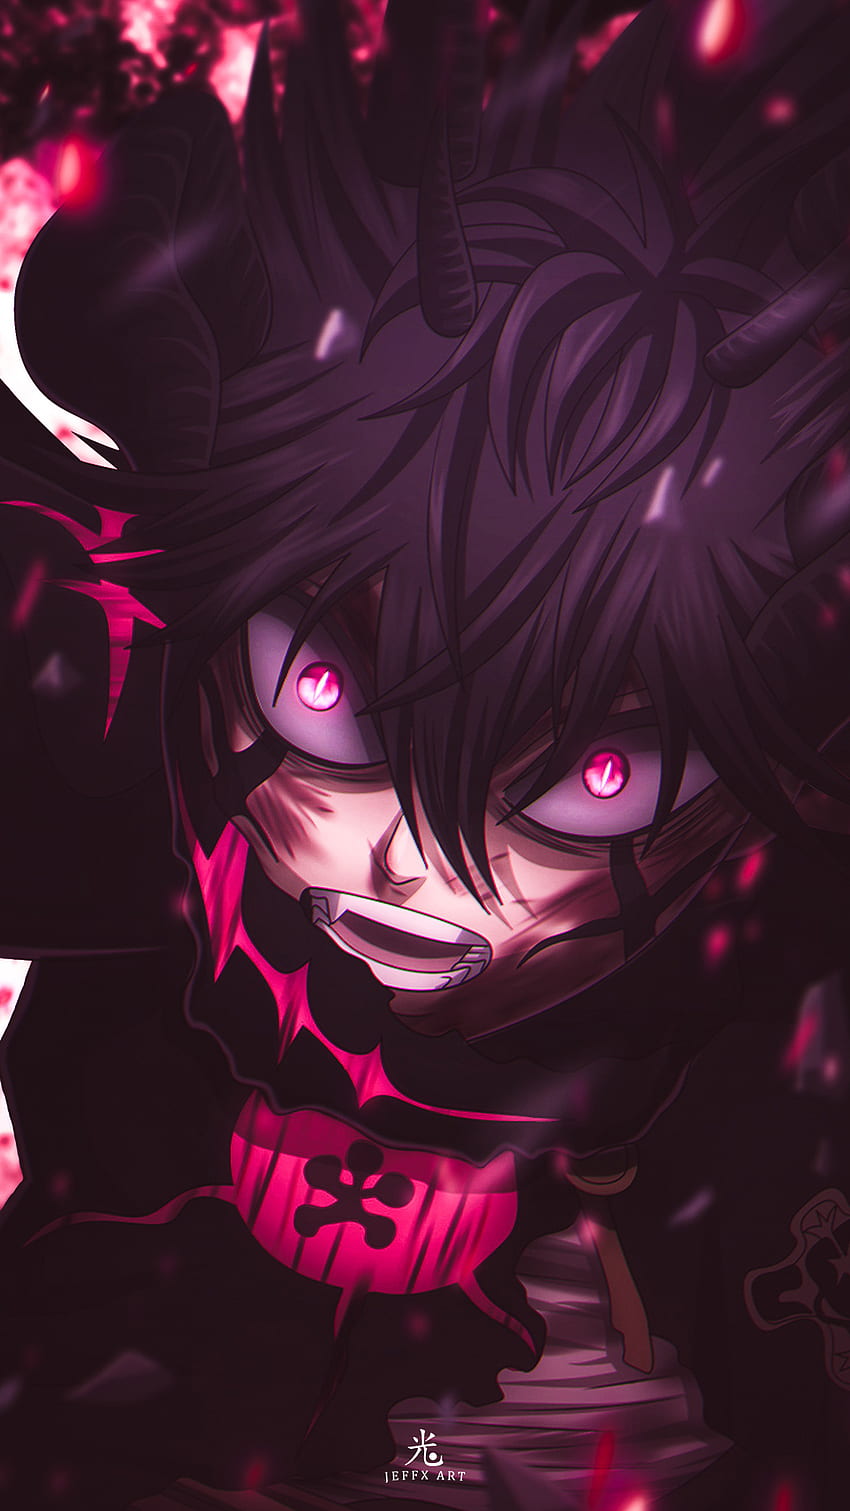 4K] Devil Wallpaper from OP 12 (removed Asta from the pic) : r